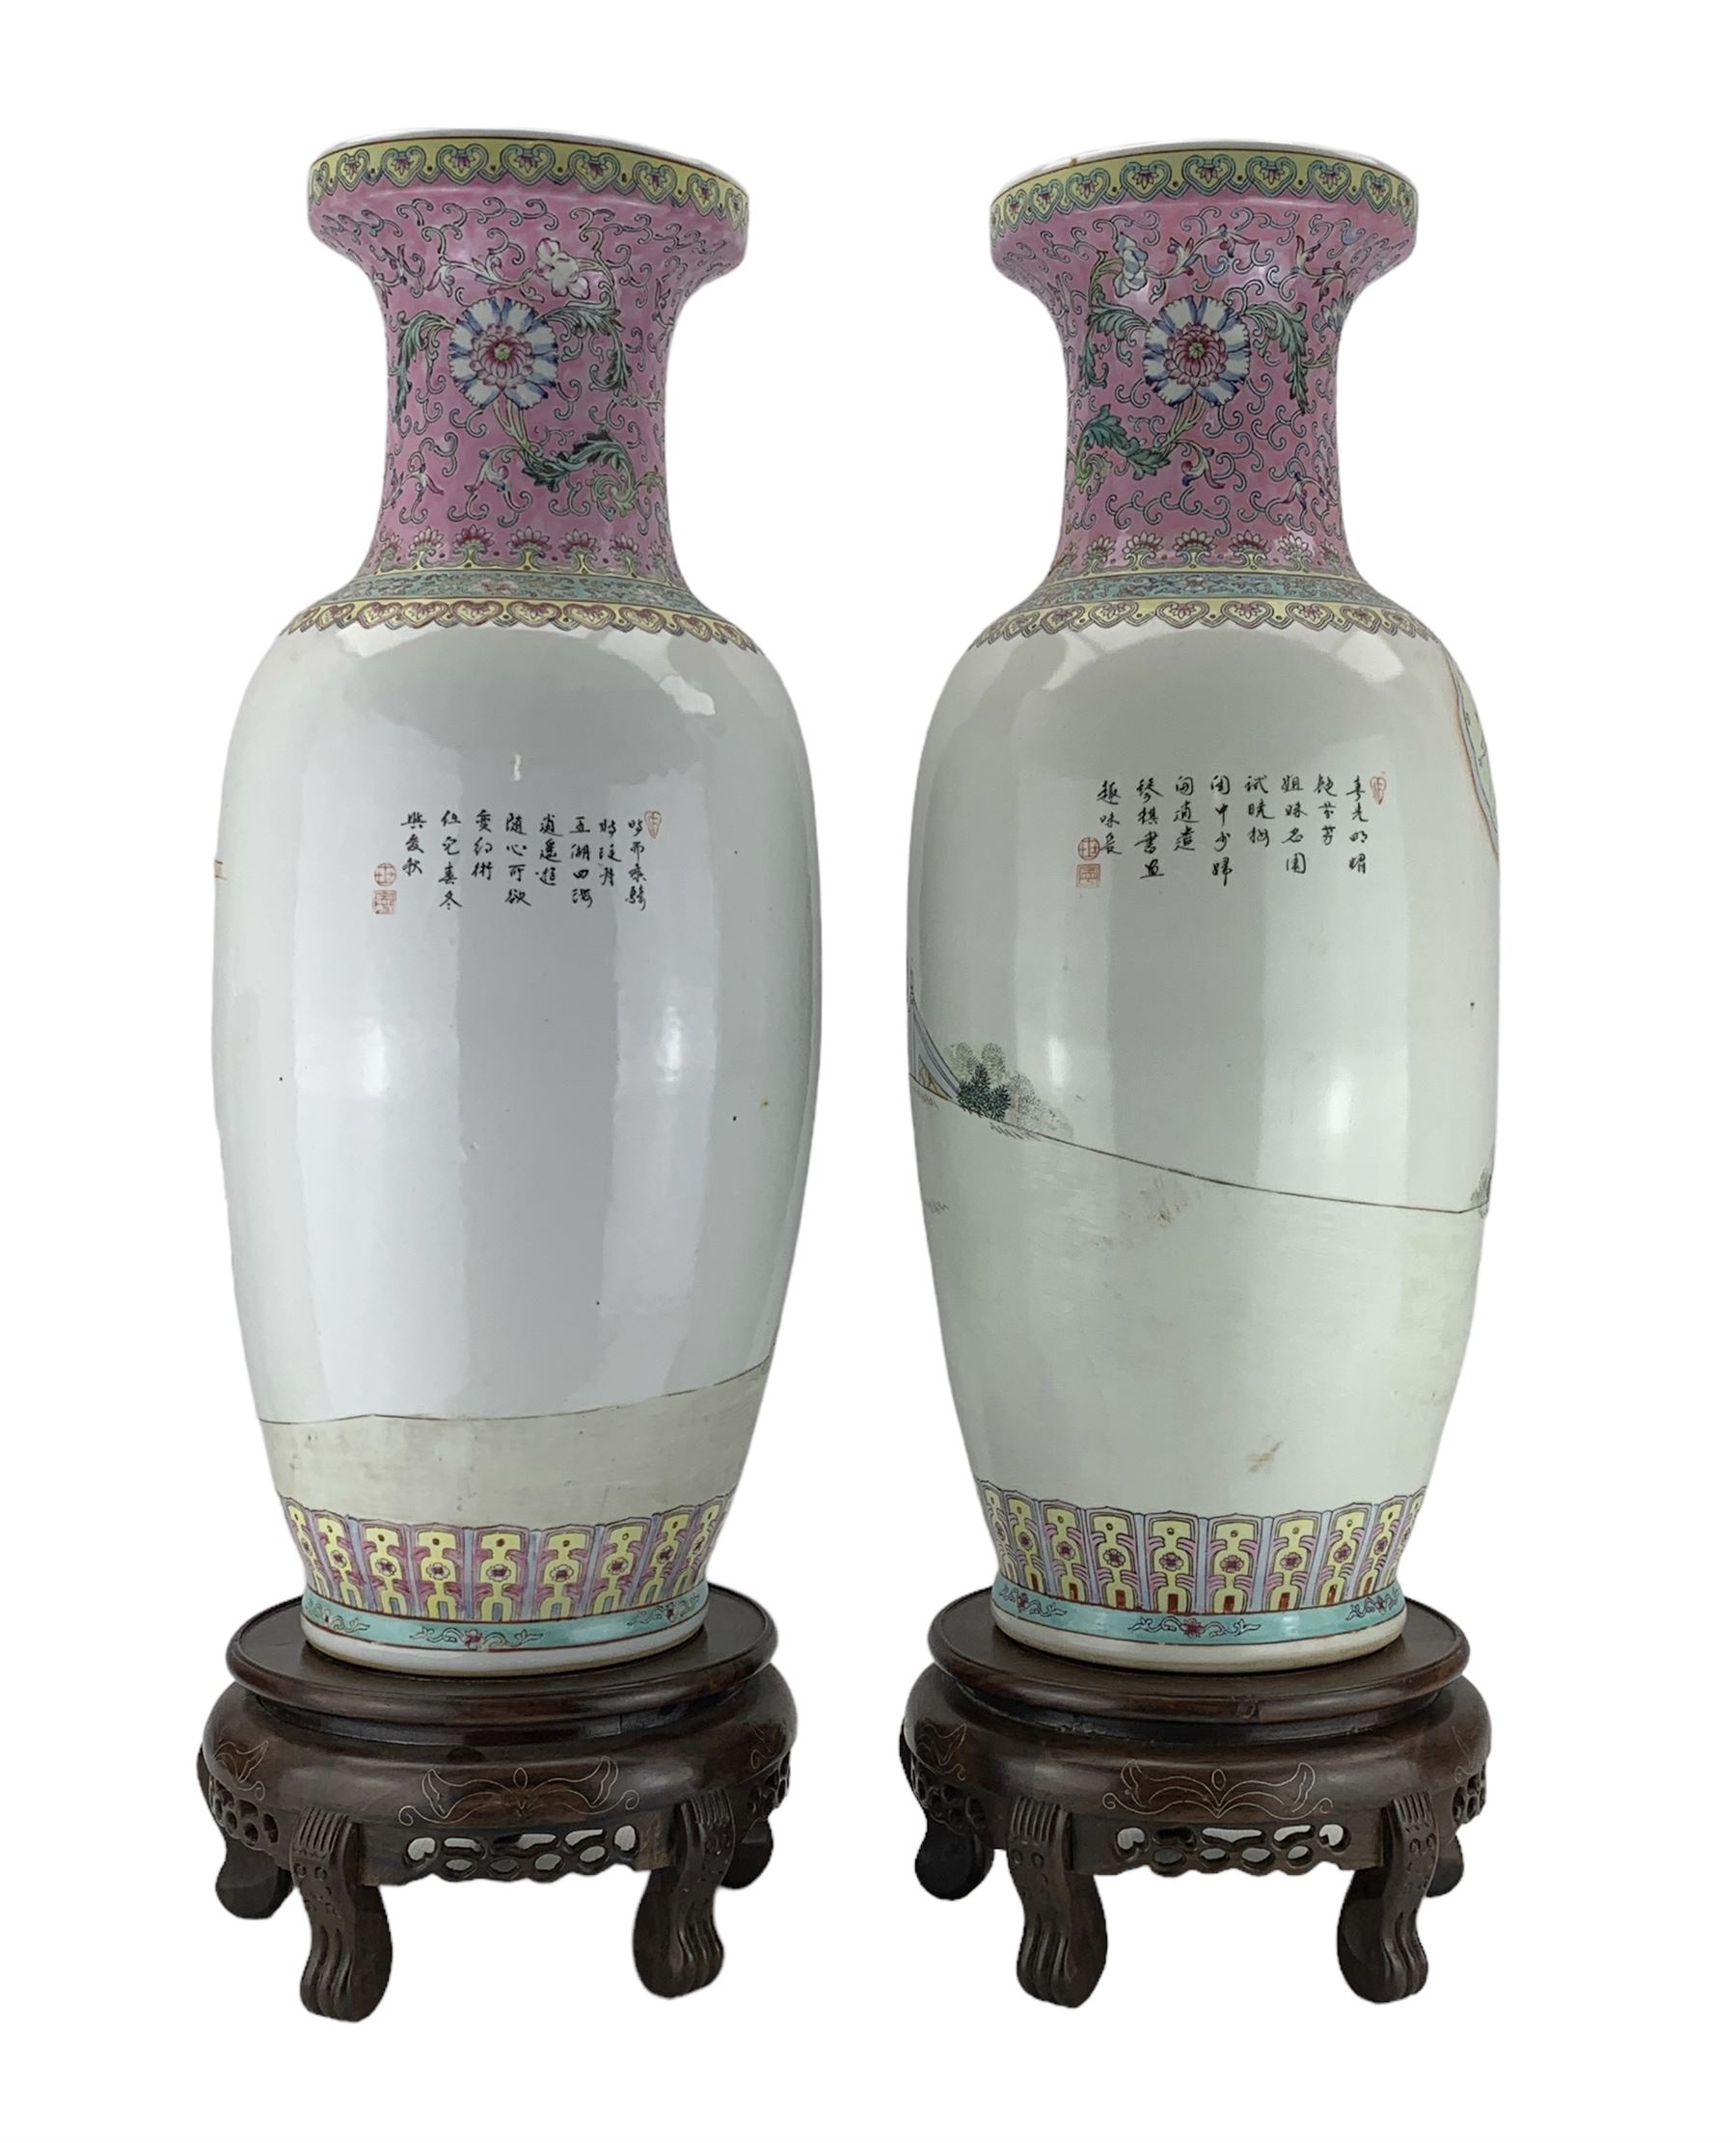 Pair of Chinese Famille Rose porcelain vases - Image 2 of 3